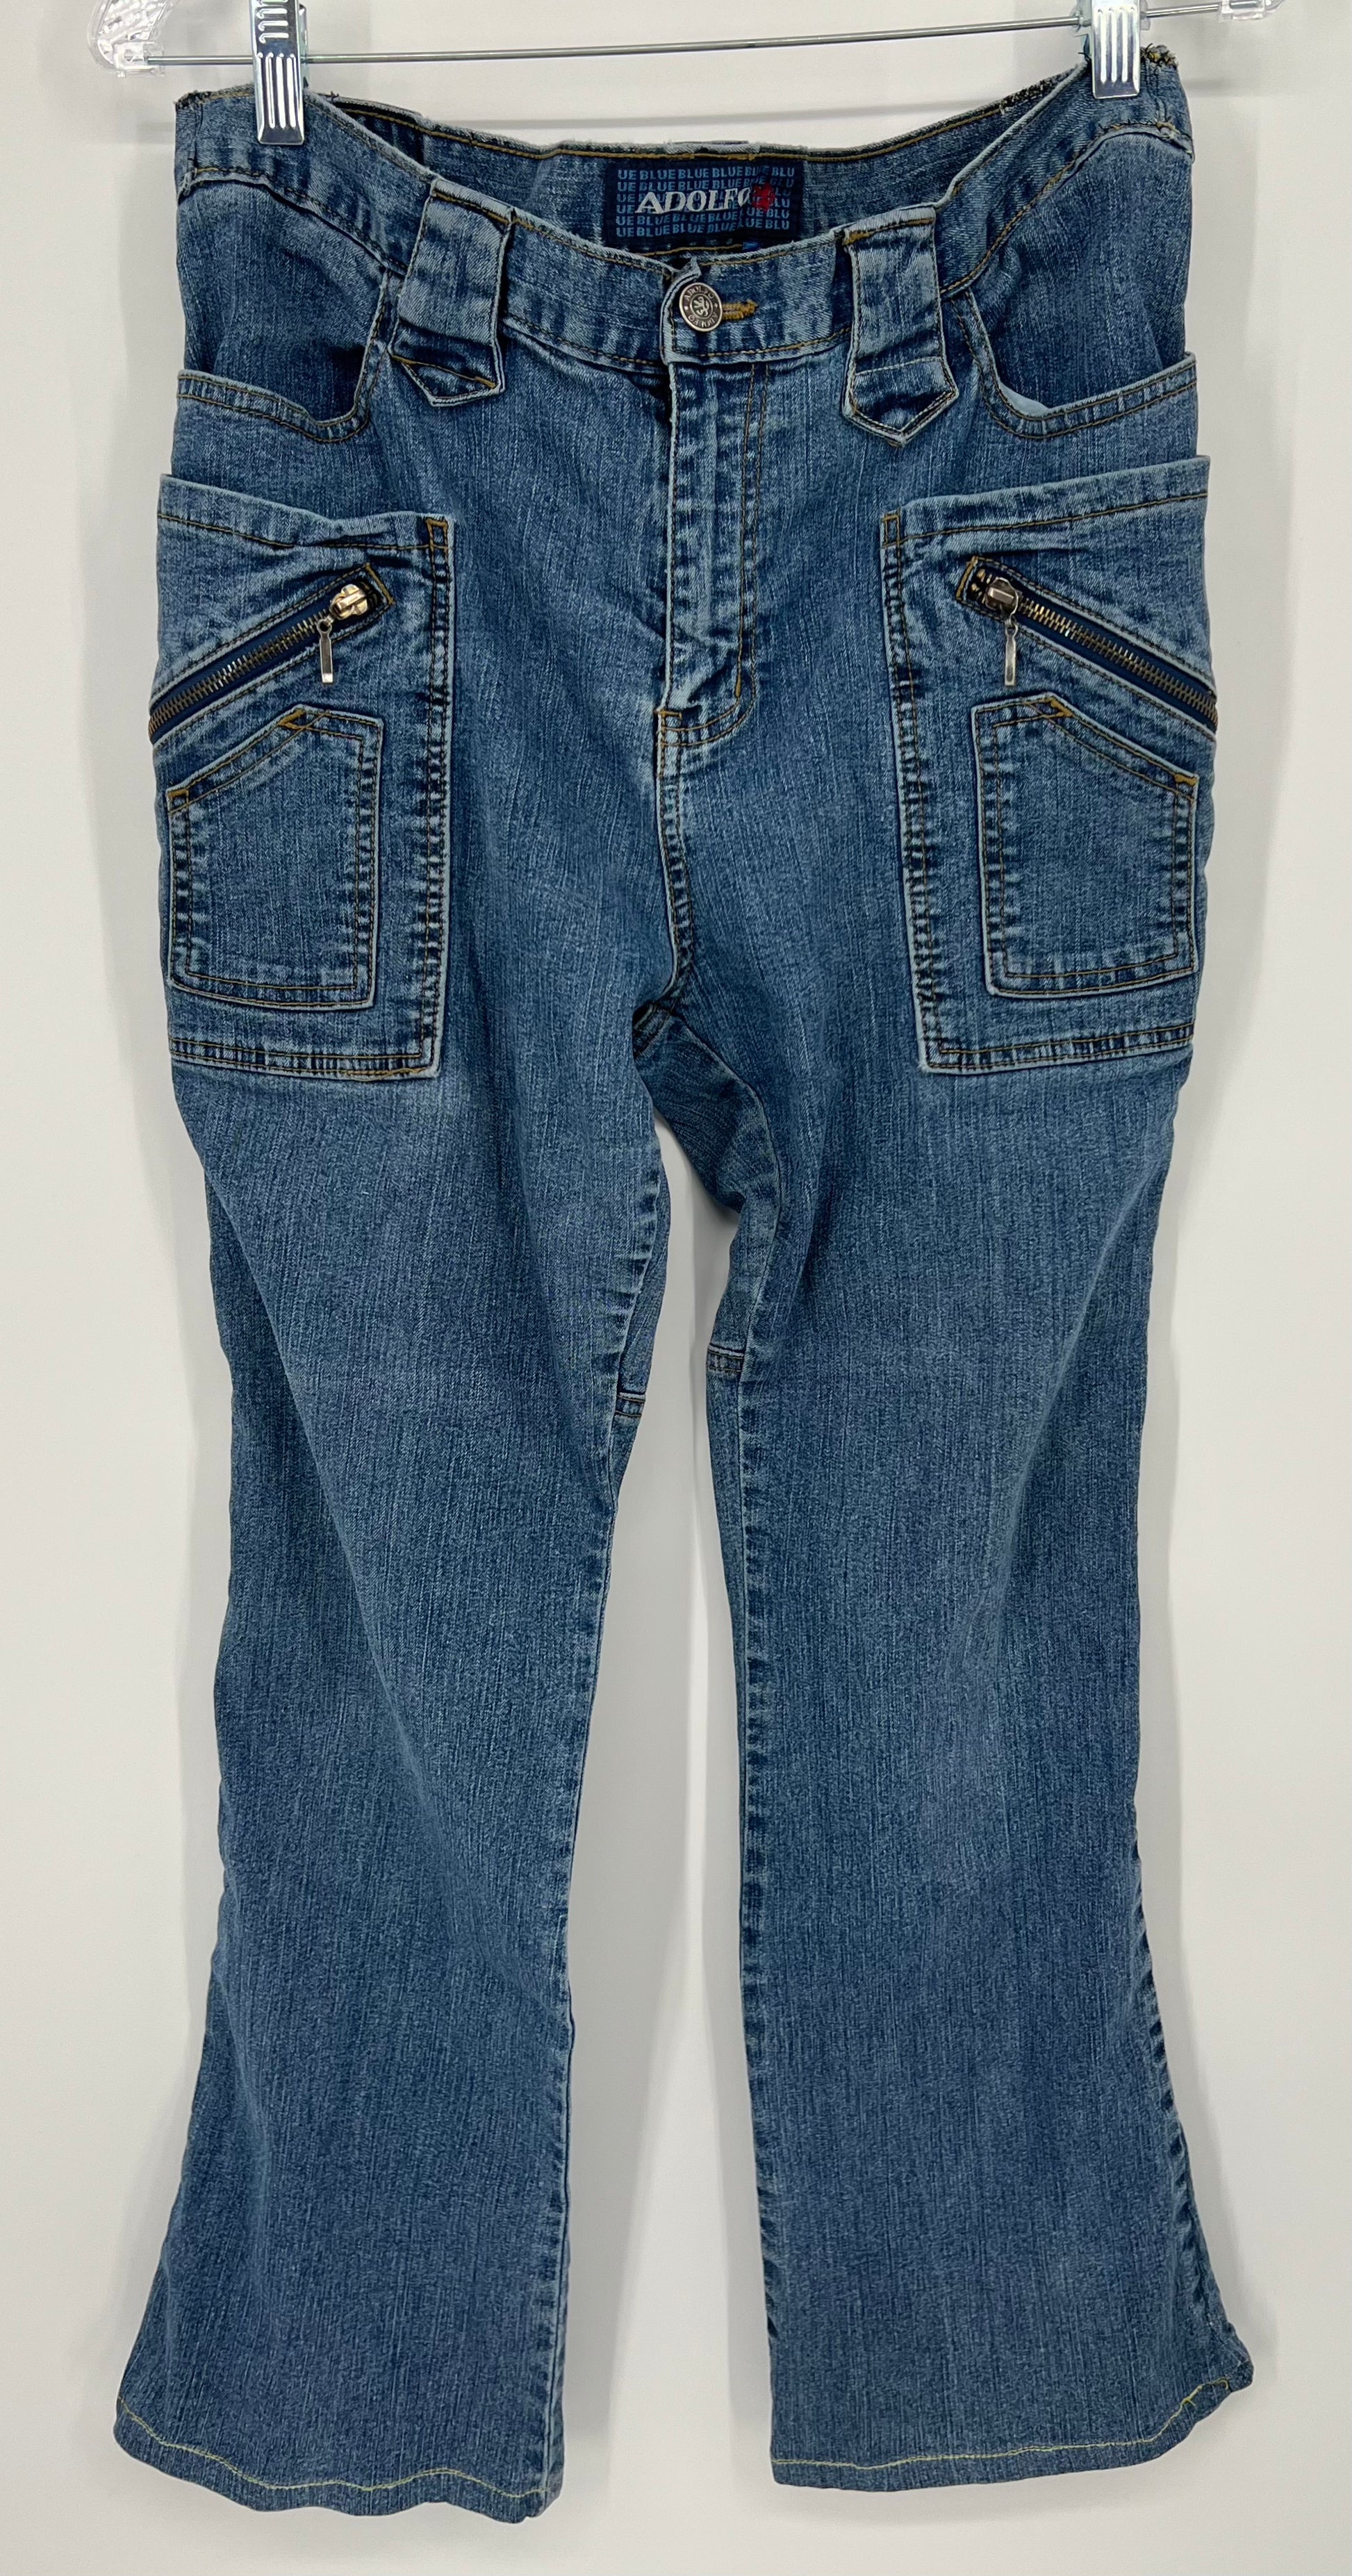 Vintage 90s / Y2K Adolfo Mid-Rise Jeans with Zippered Cargo